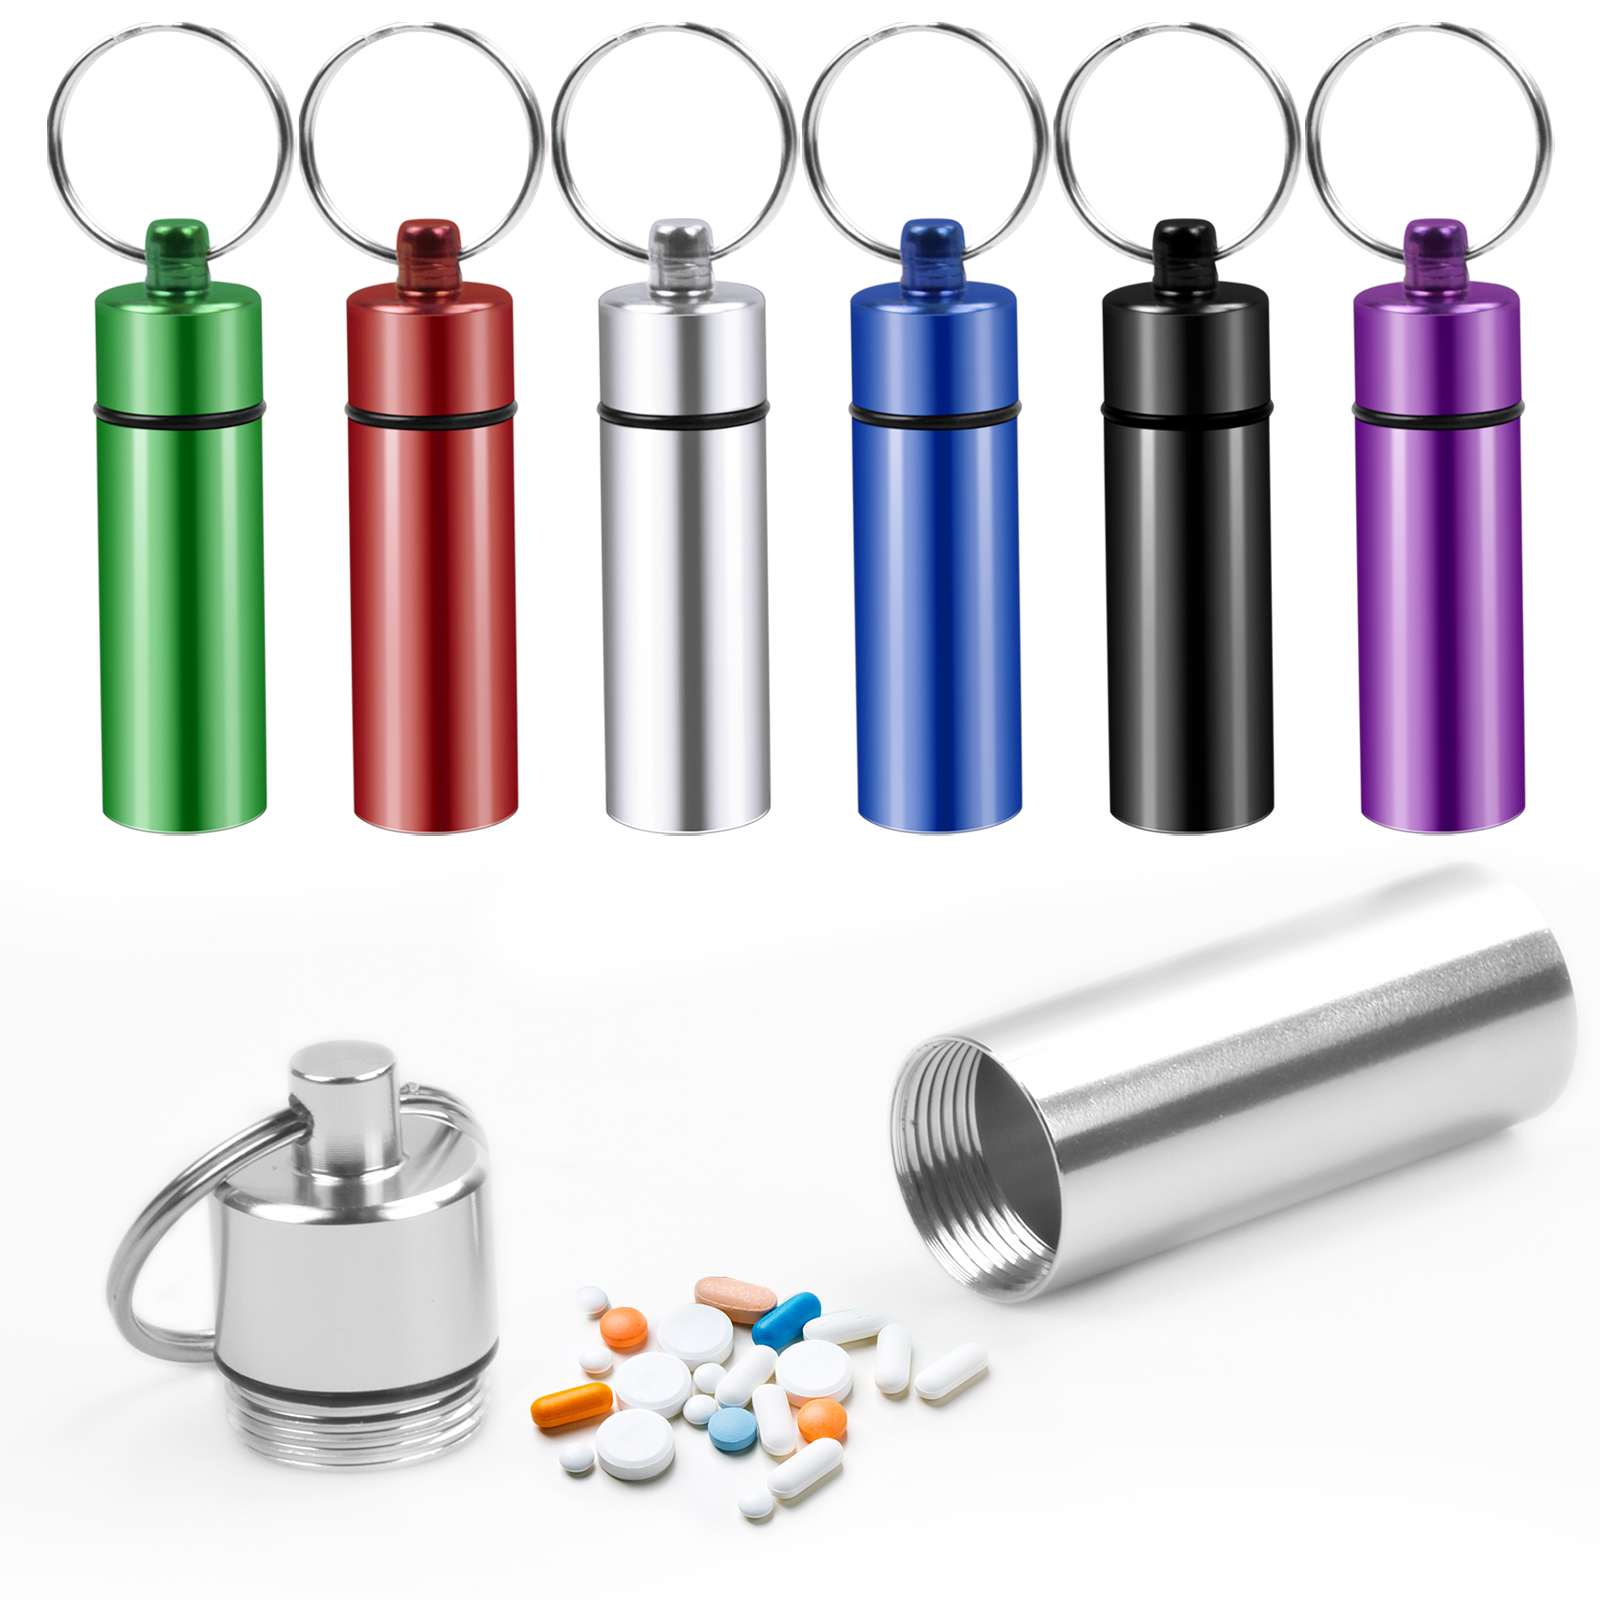 Small Portable Pill case Keychain, Metal Pocket Pill Boxes for